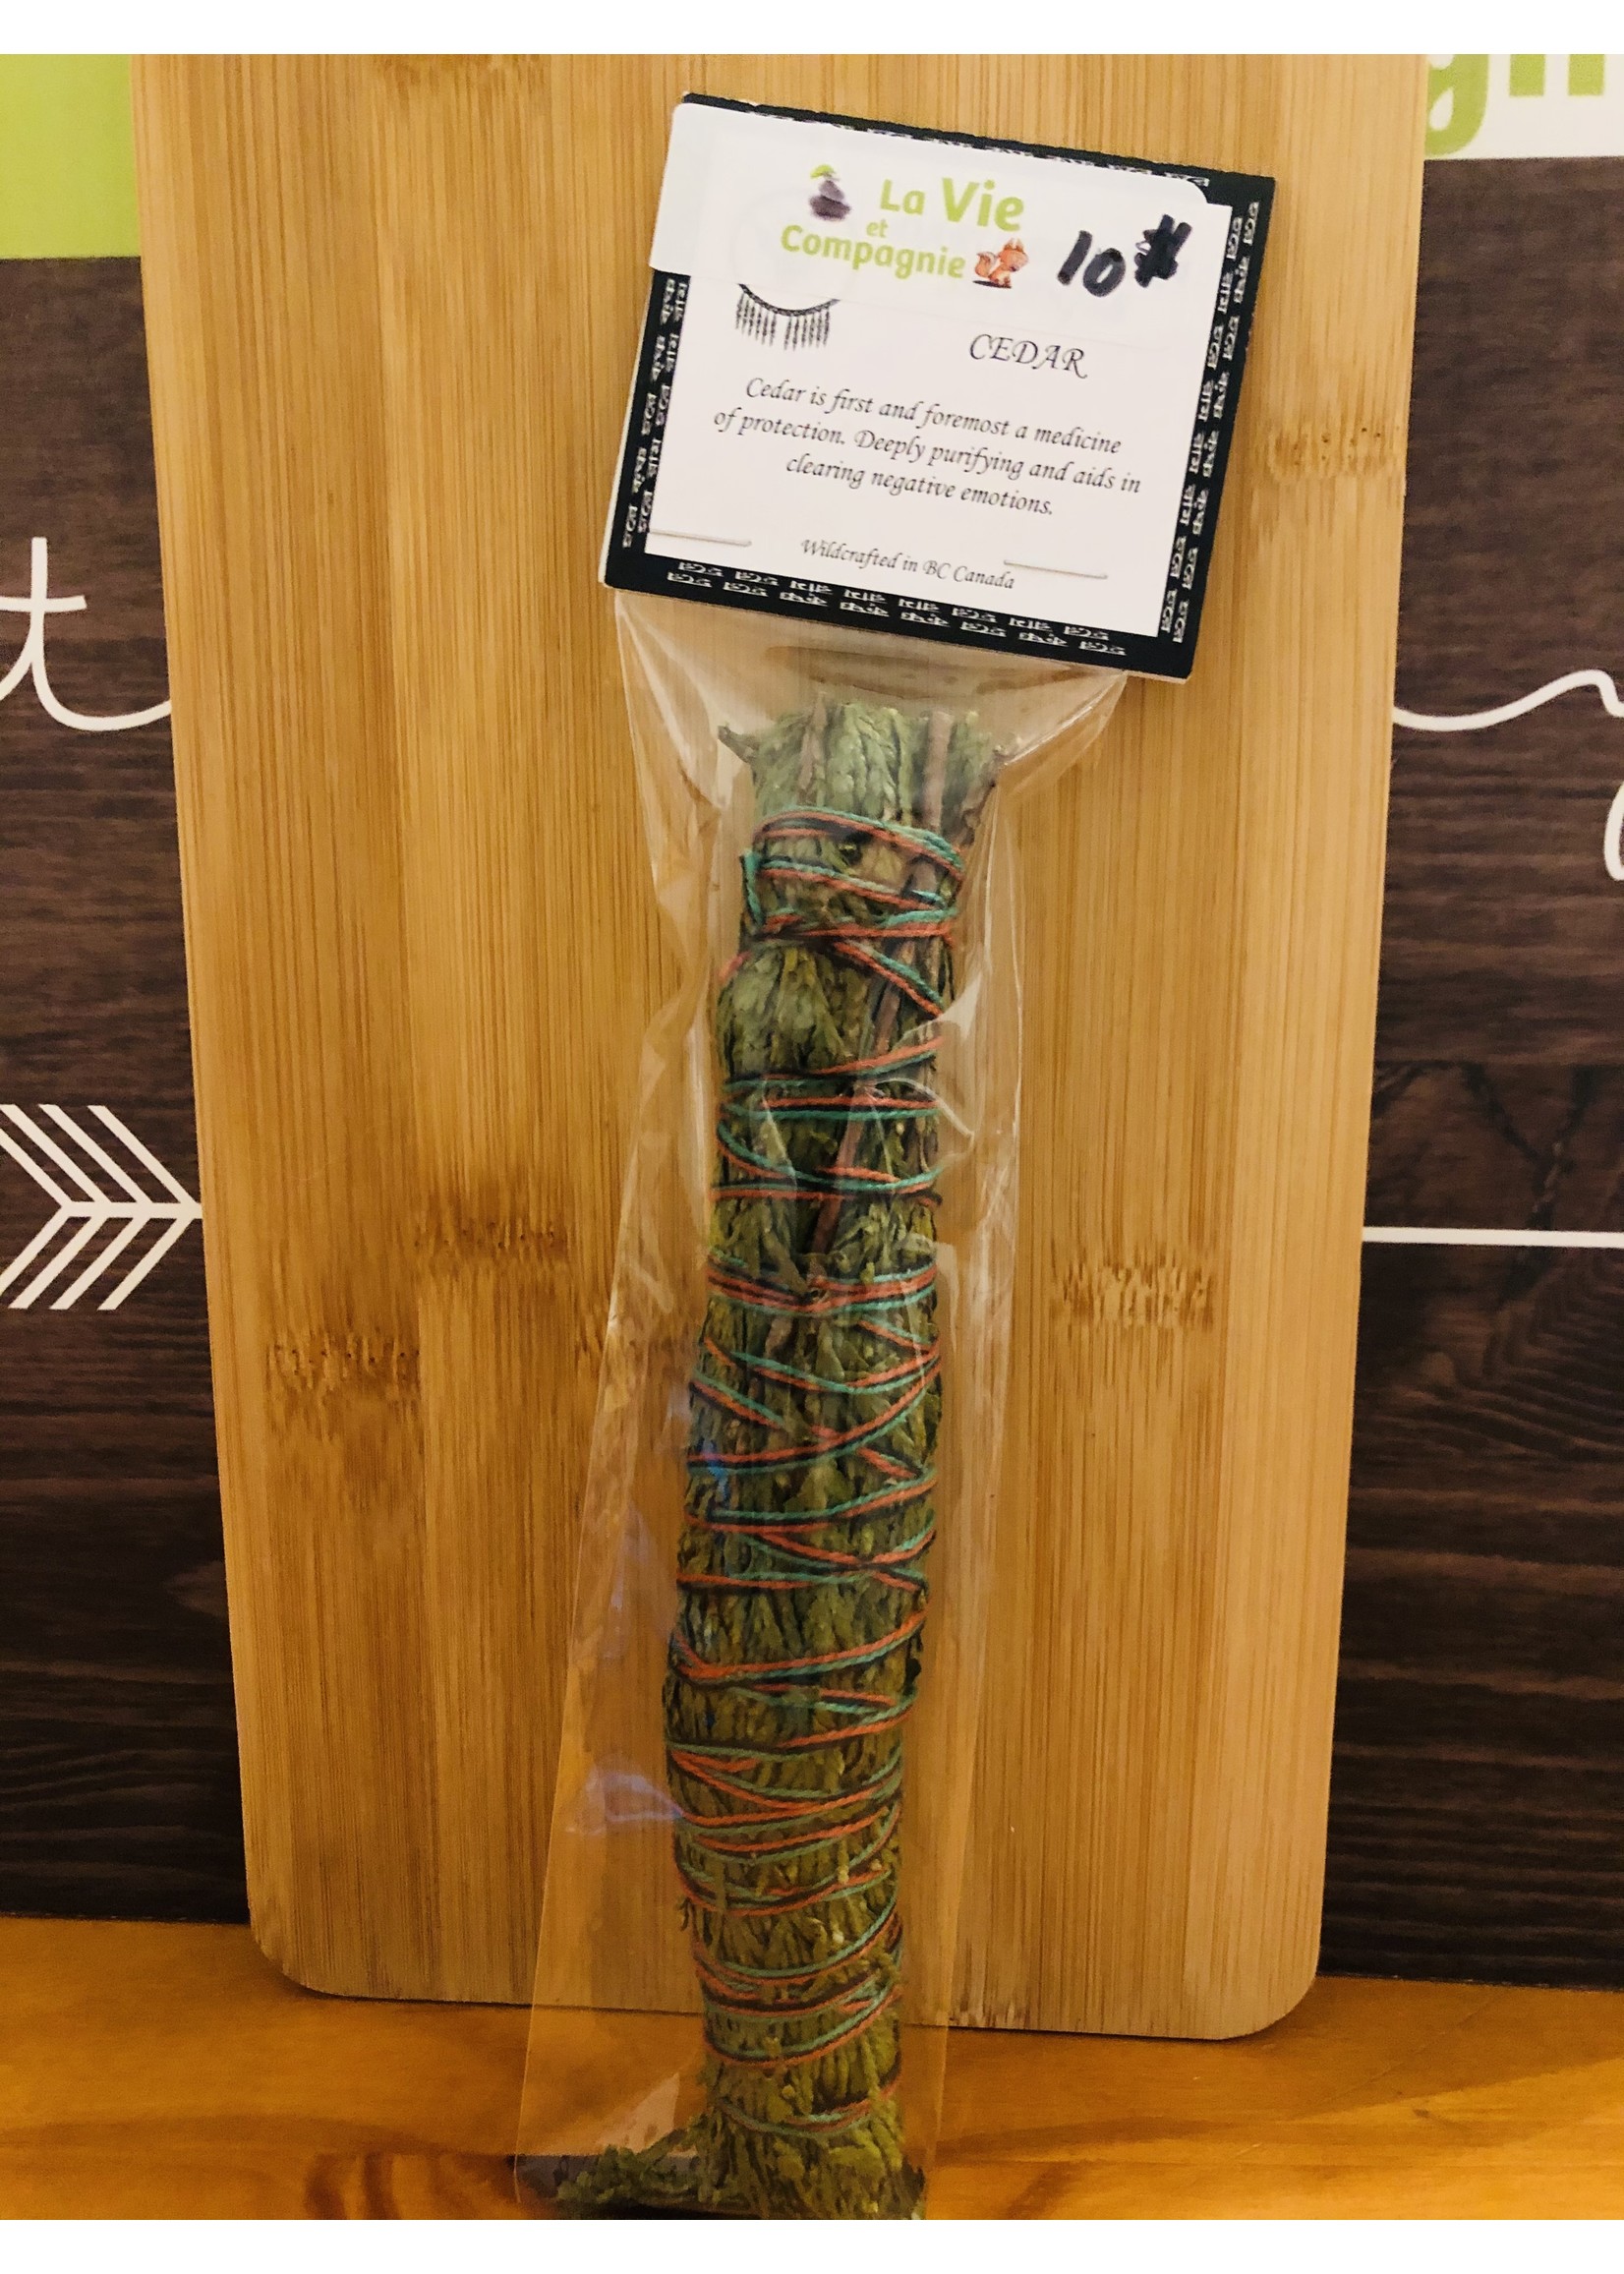 Cedar Smudge Stick from High Mountain Valley near Ashcroft, BC – For Protection, Healing, Purification & Emotional Balance